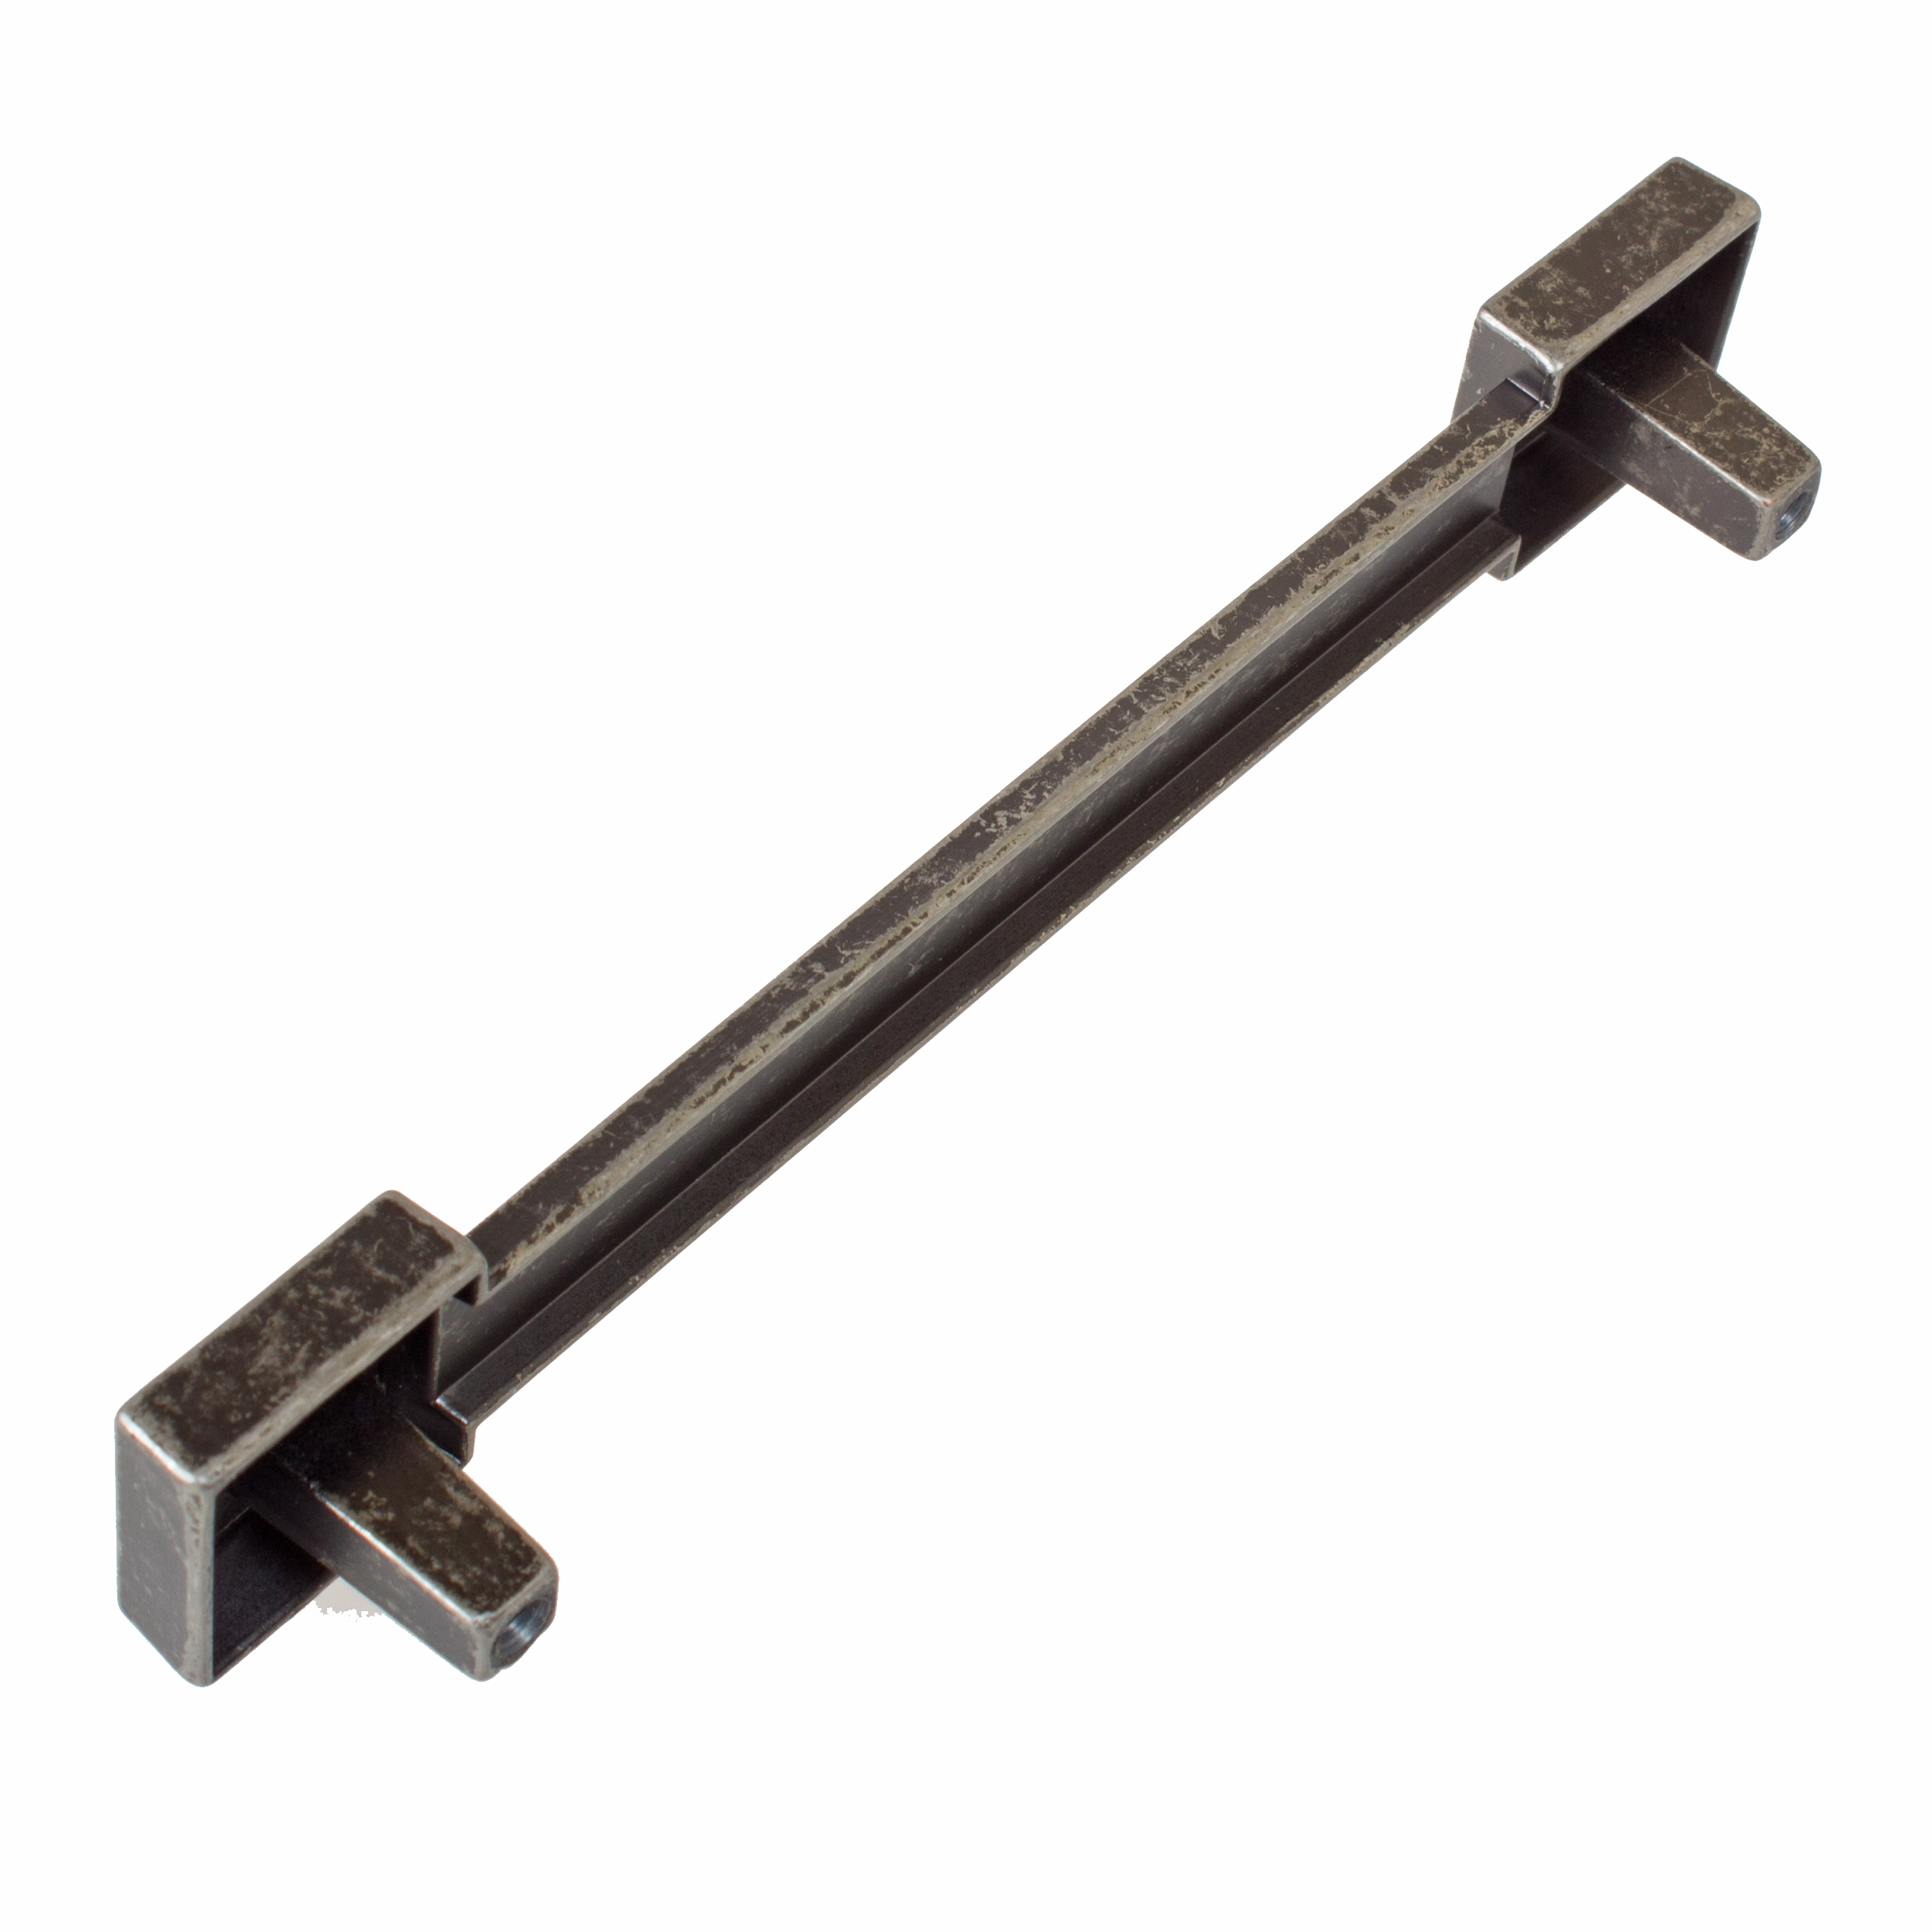 GlideRite 5 Inch Center Square Edge Pull Cabinet Hardware Handles, Weathered Nickel, Pack of 25 - image 2 of 5